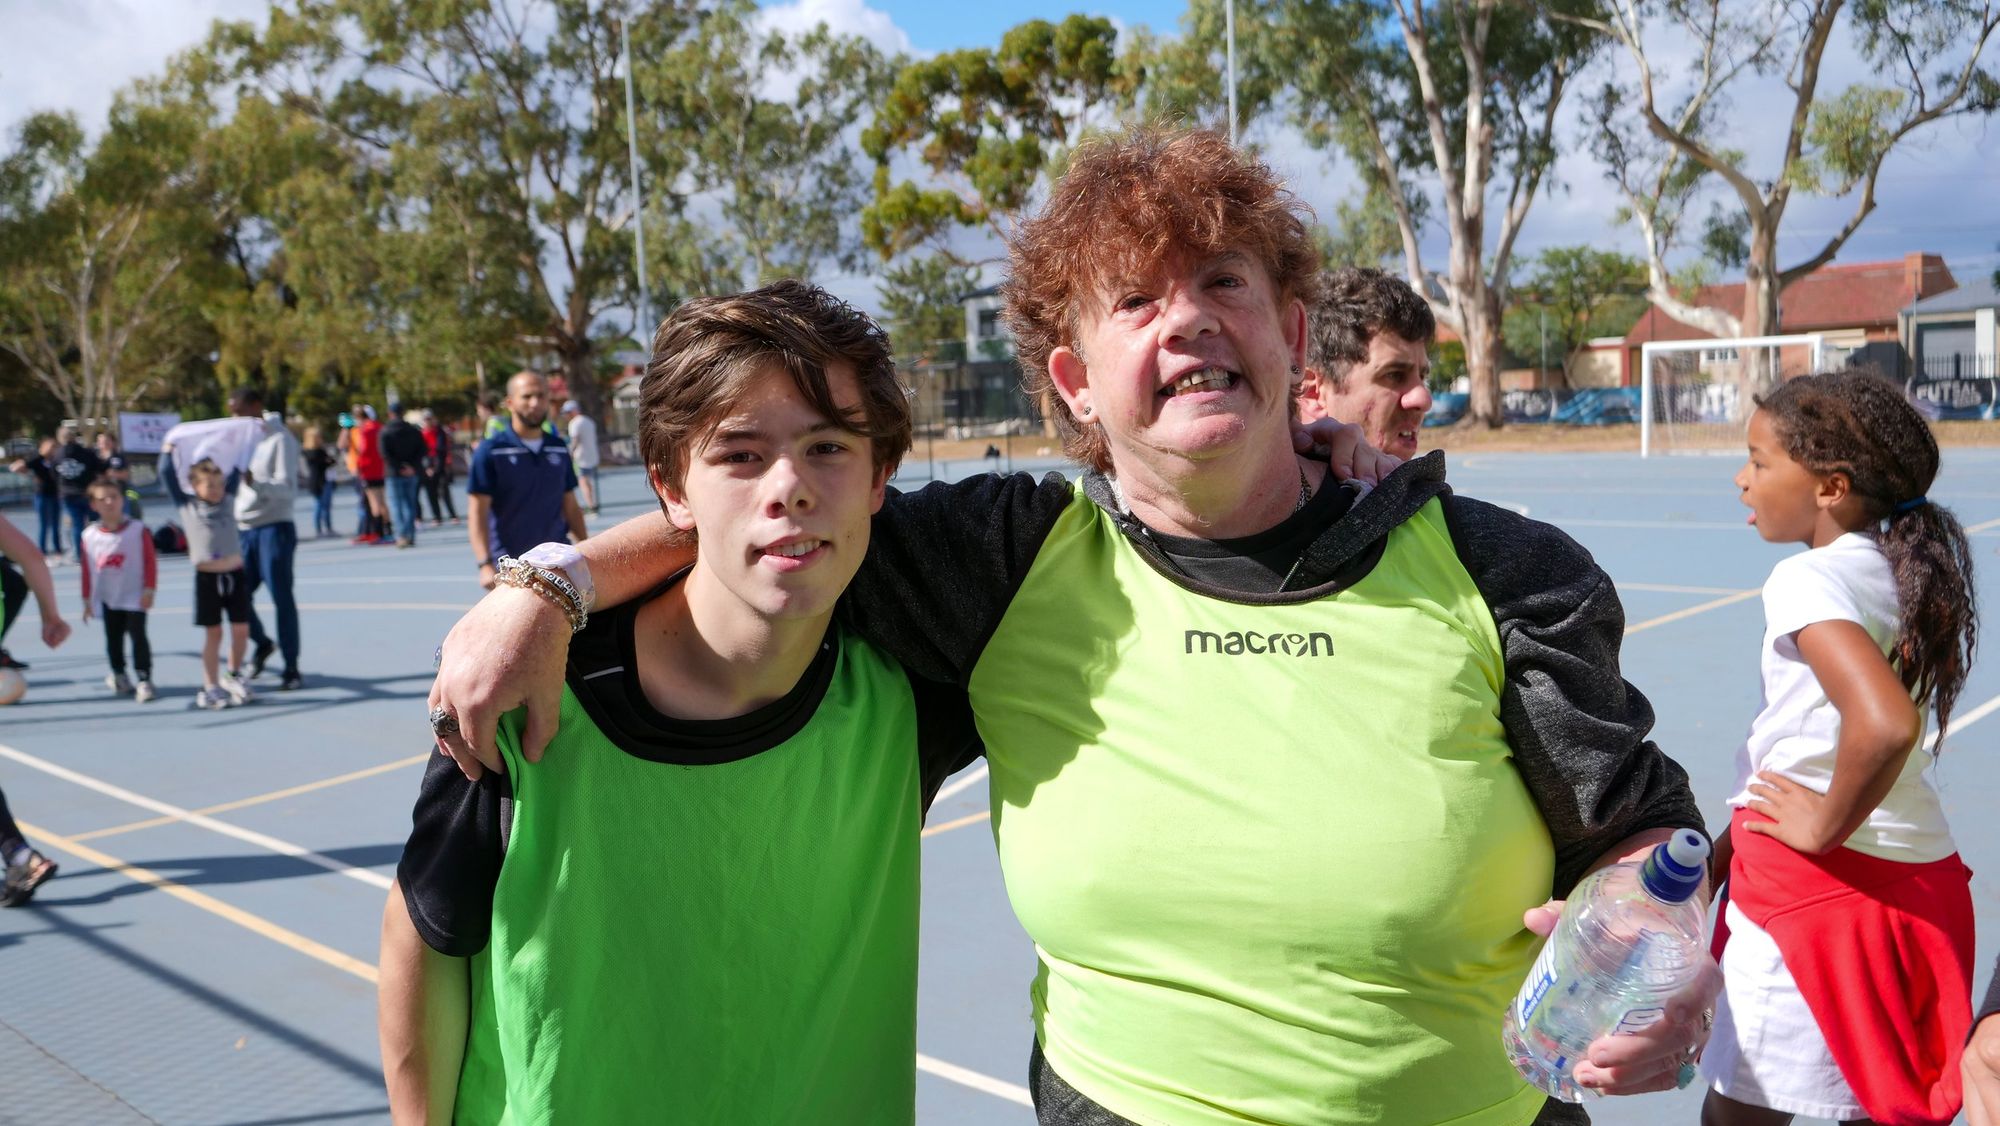 A woman in a yellow sports bib stands on a court with her arm around a boy in a green bib